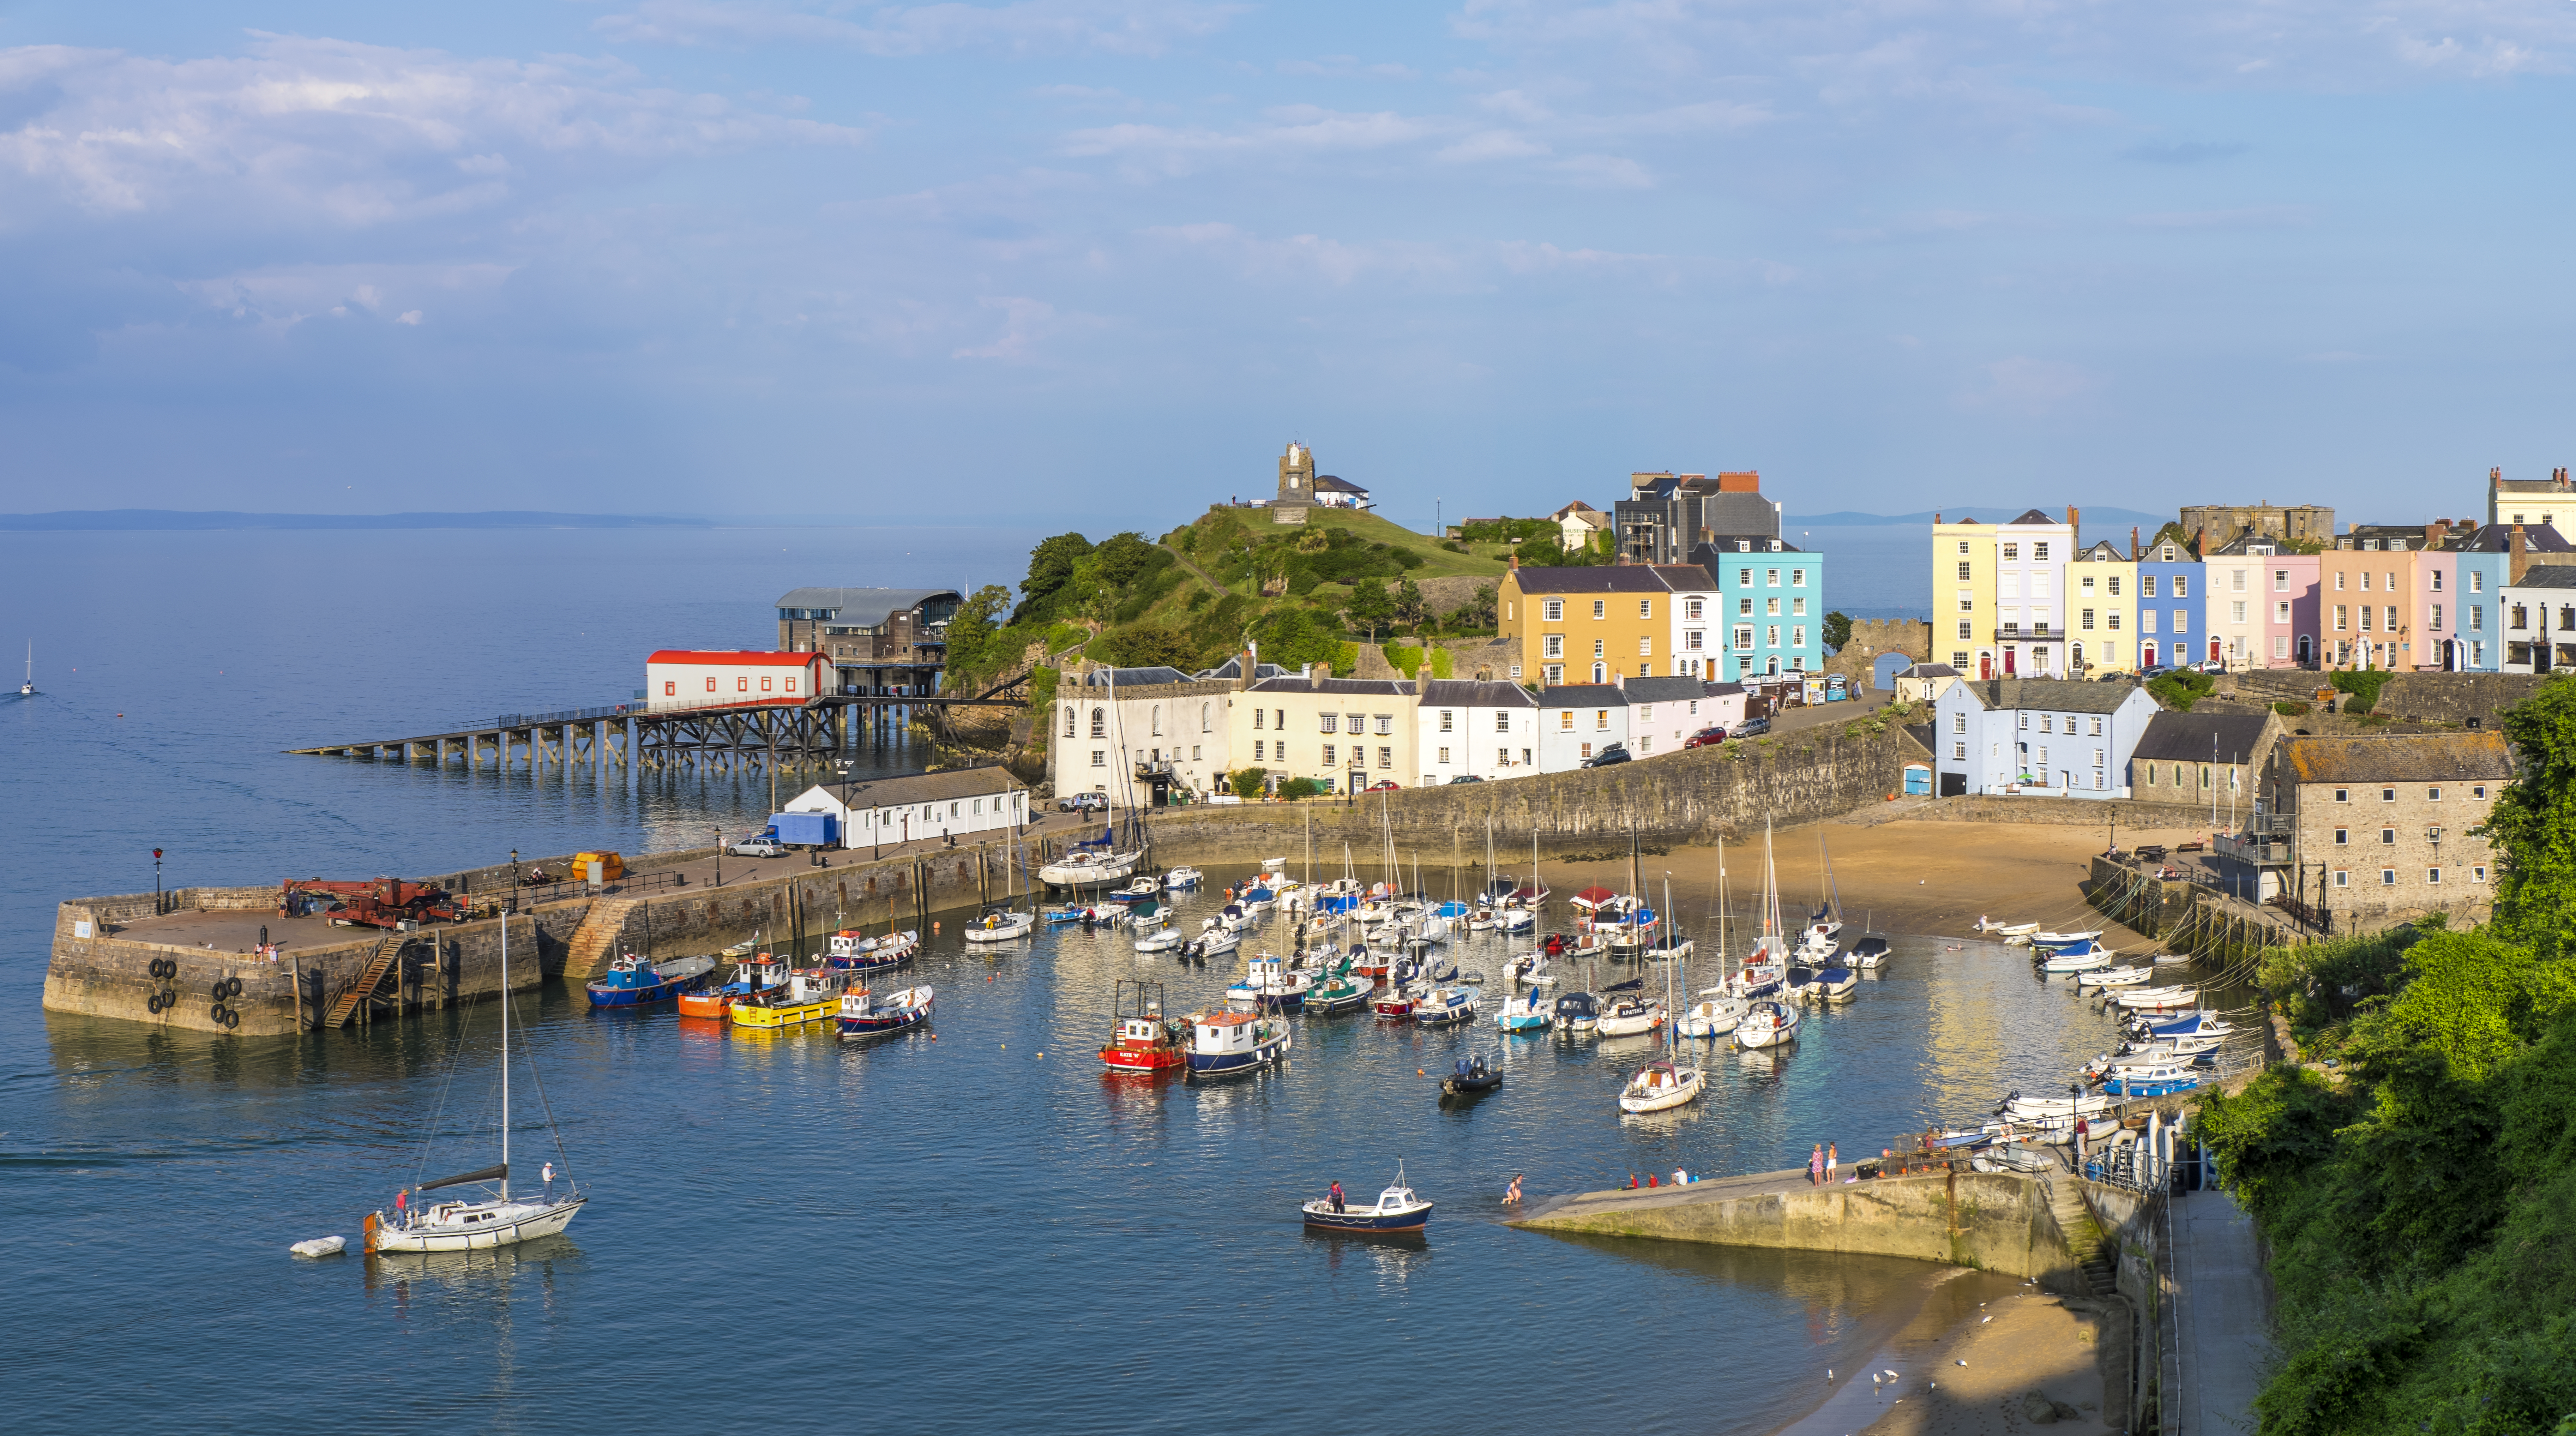 Tenby is the jewel in crown of the Pembrokeshire coast with its colourful houses